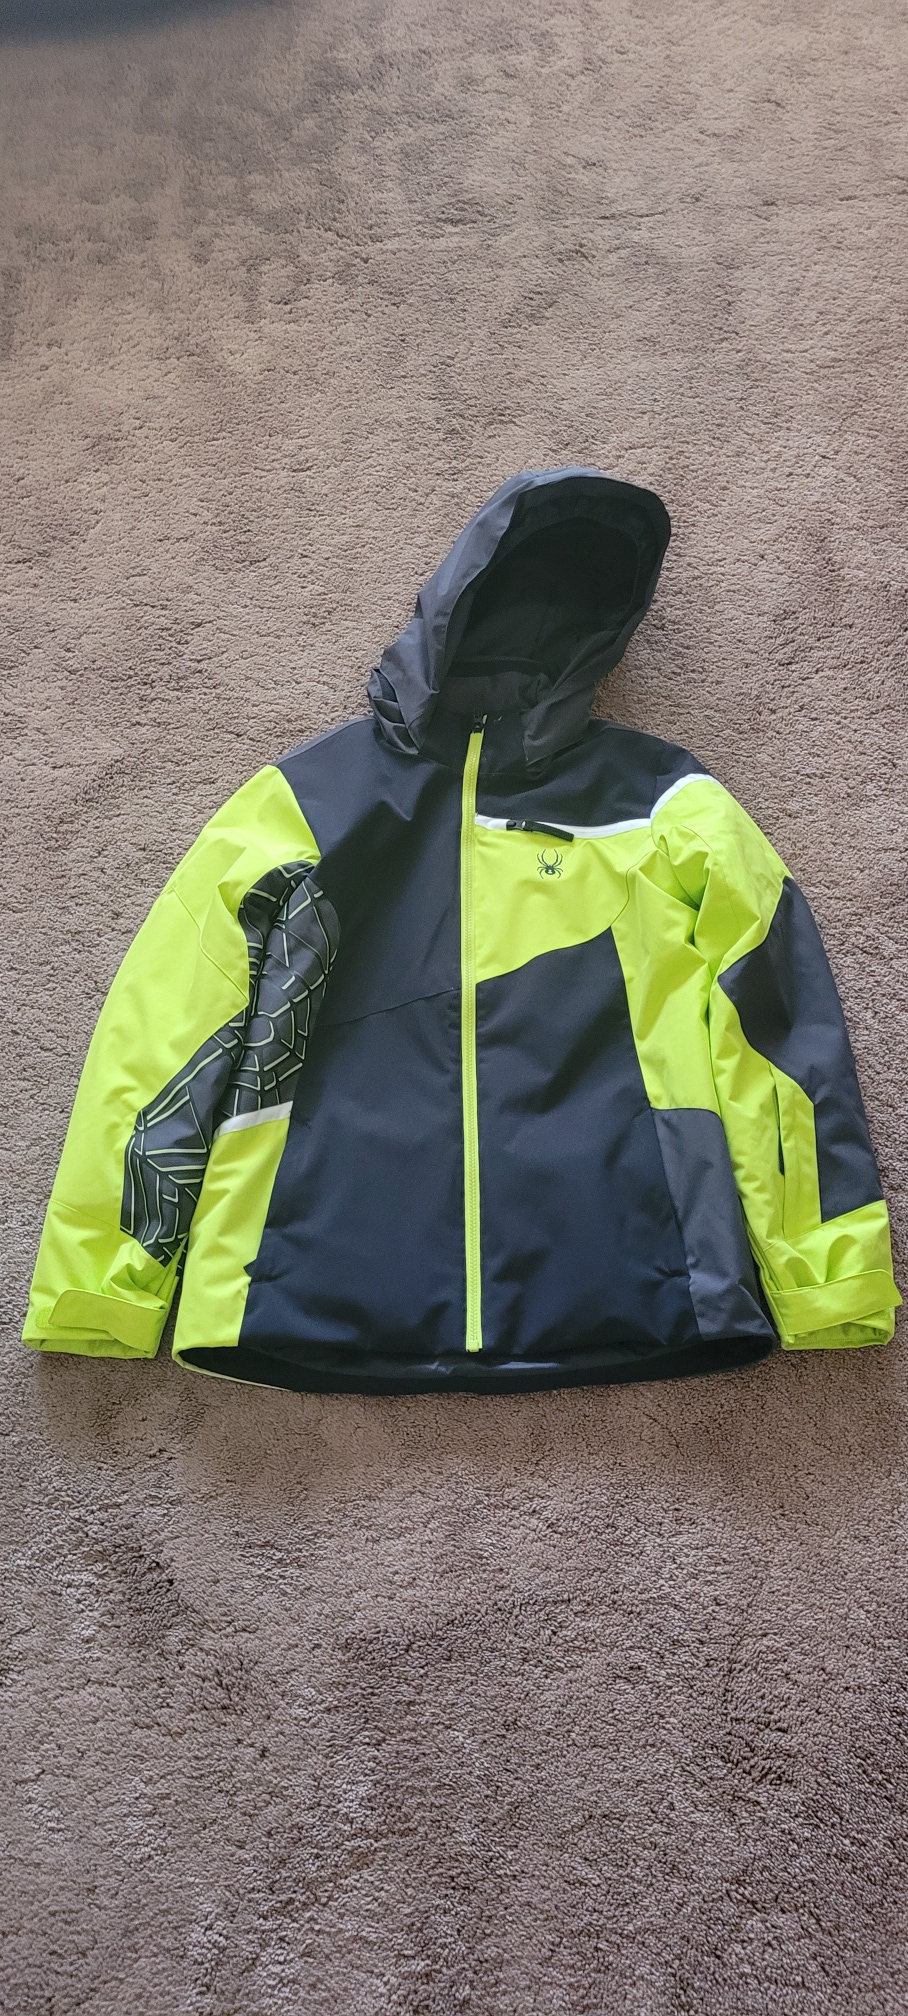 Spyder Jacket for kids size 18 -Very good Used